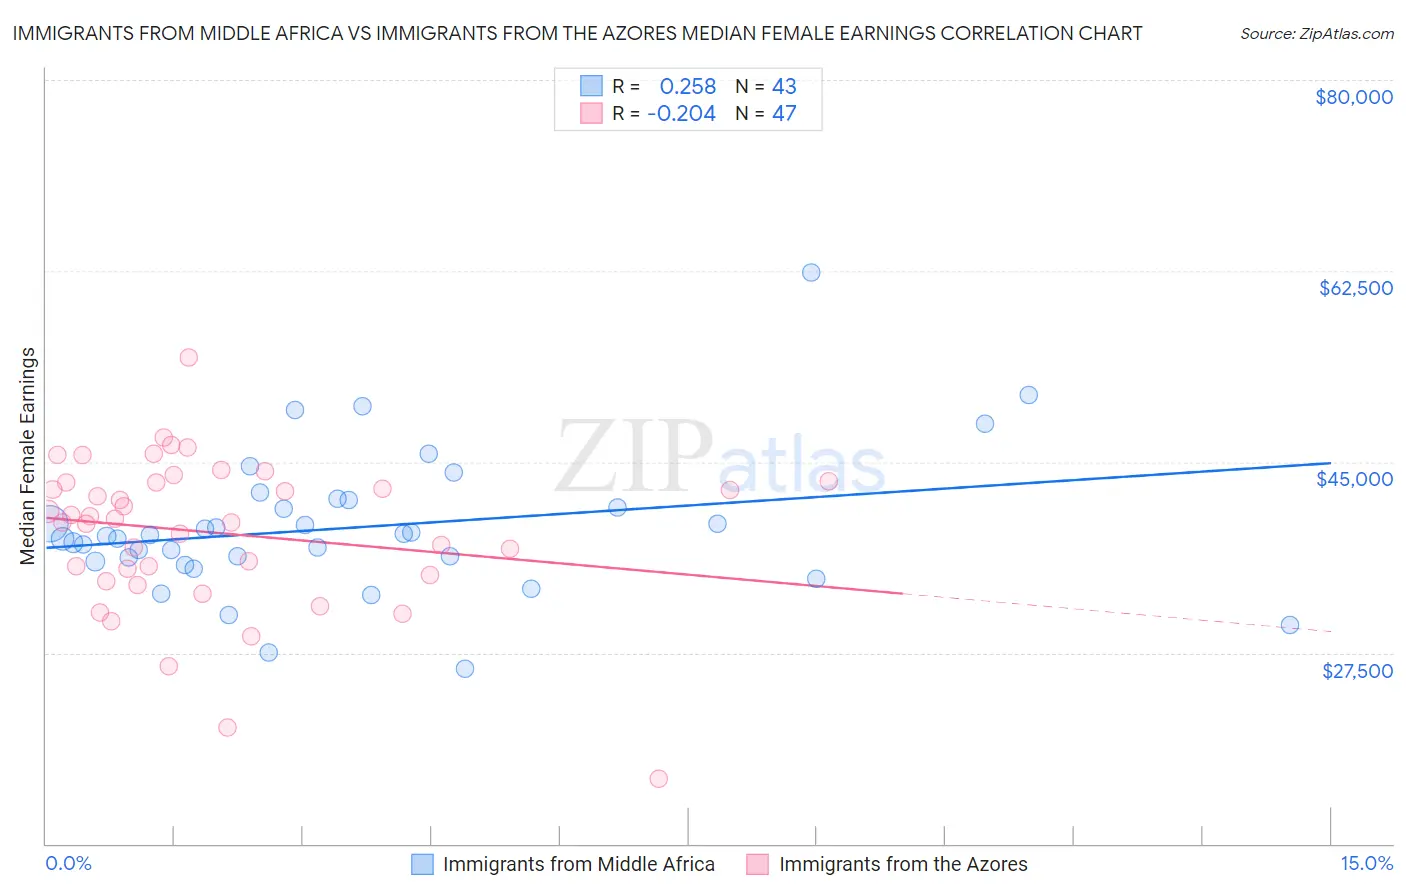 Immigrants from Middle Africa vs Immigrants from the Azores Median Female Earnings